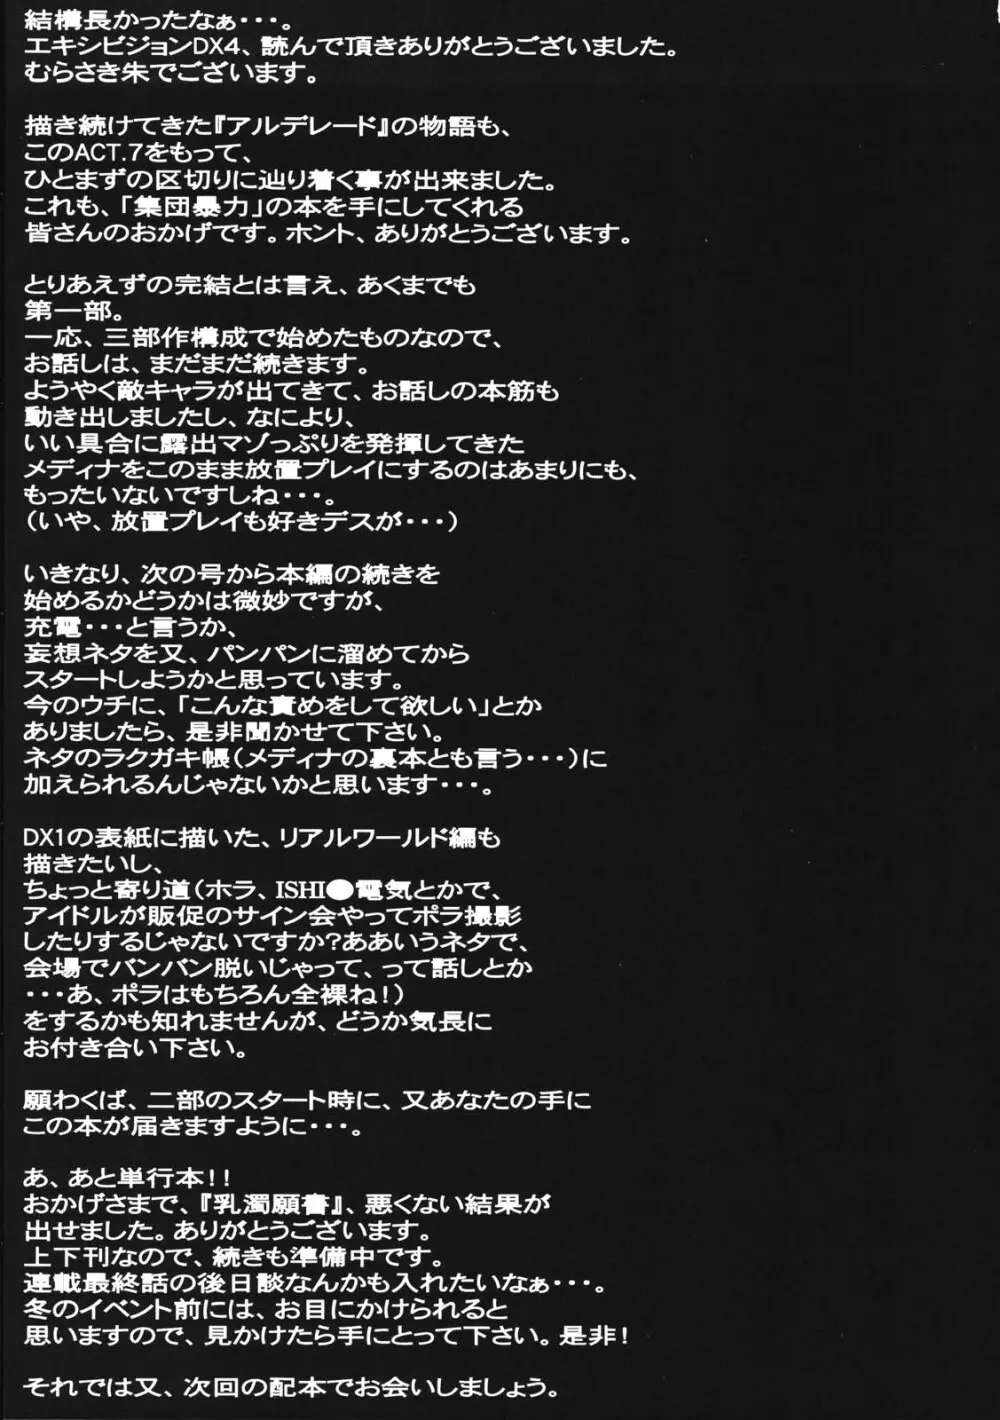 File/12 Record of Aldelayd - EXHIBITION DX4 - page62